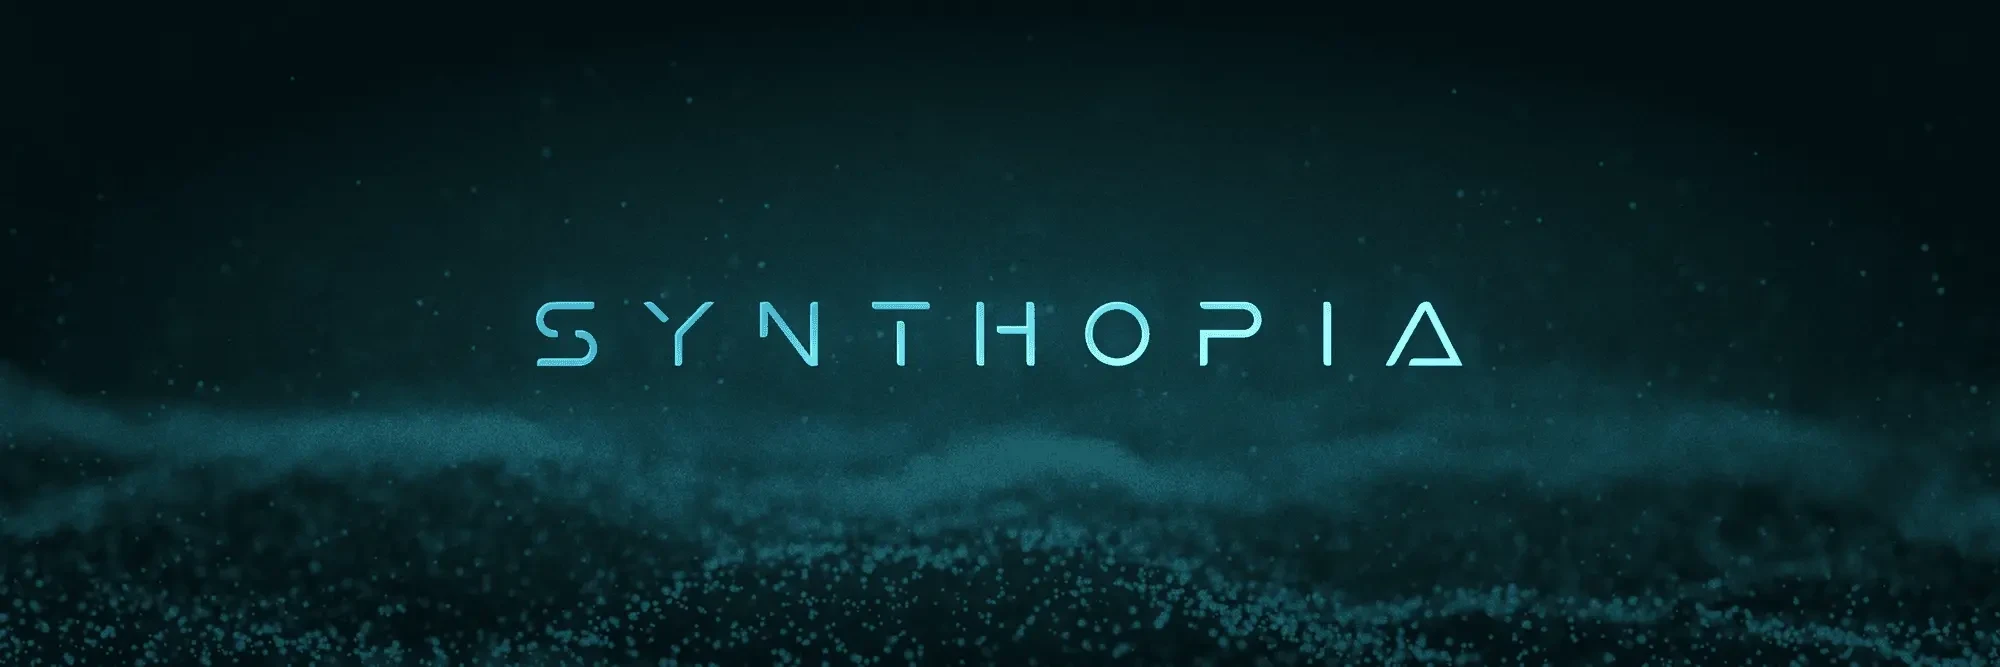 Synthopia background